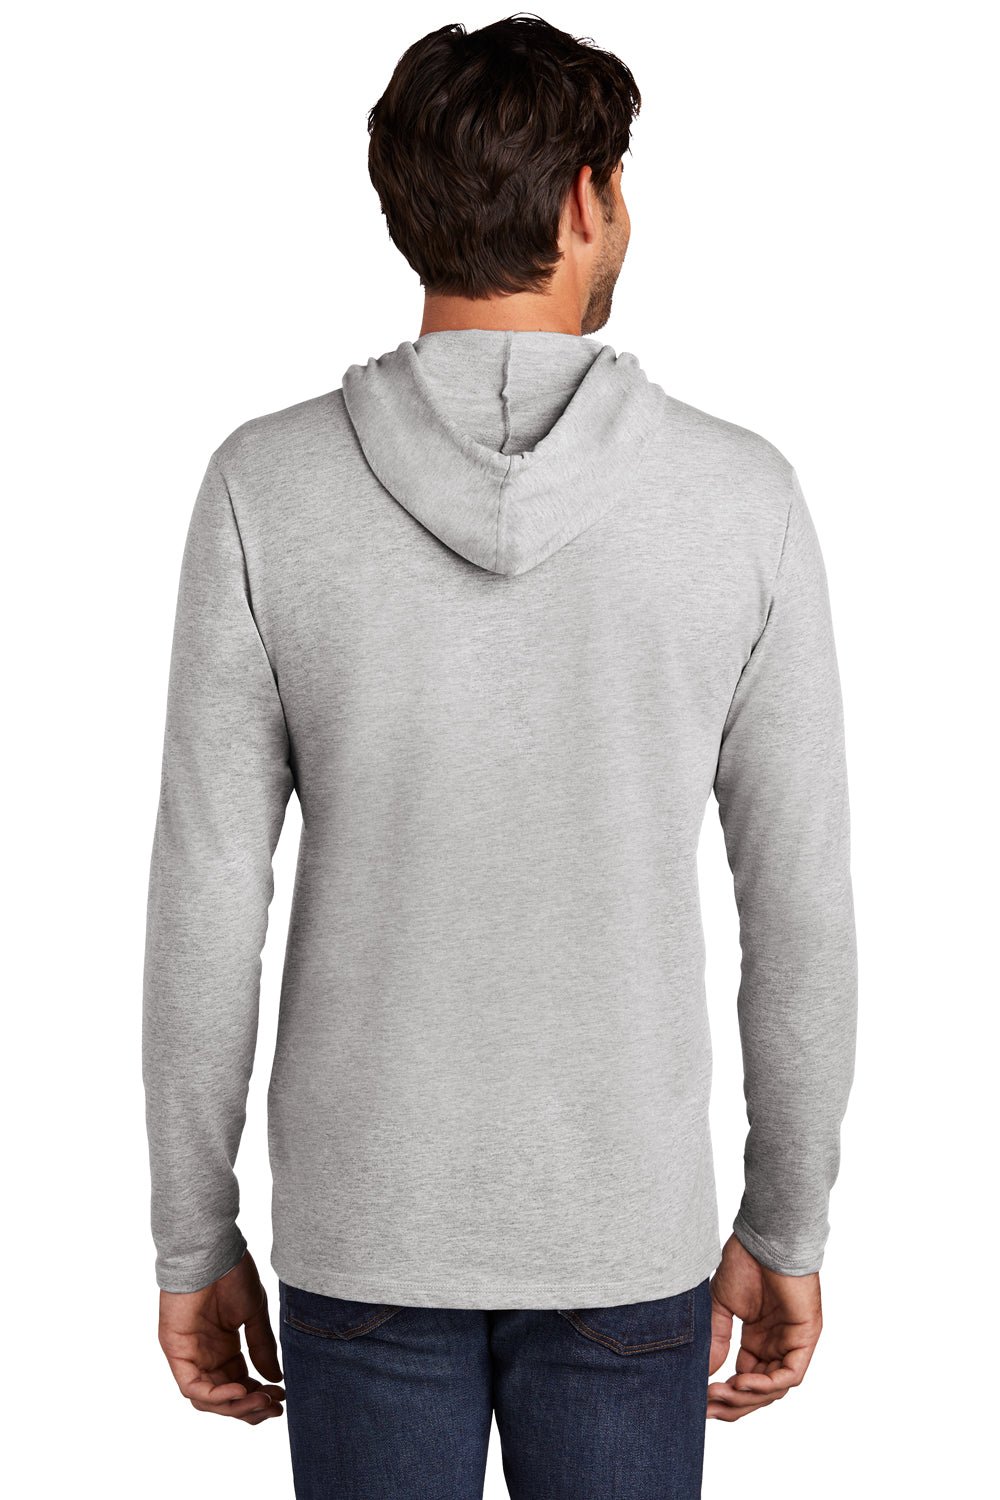 District Mens Featherweight French Terry Hooded Sweatshirt Hoodie Heather Light Grey Side